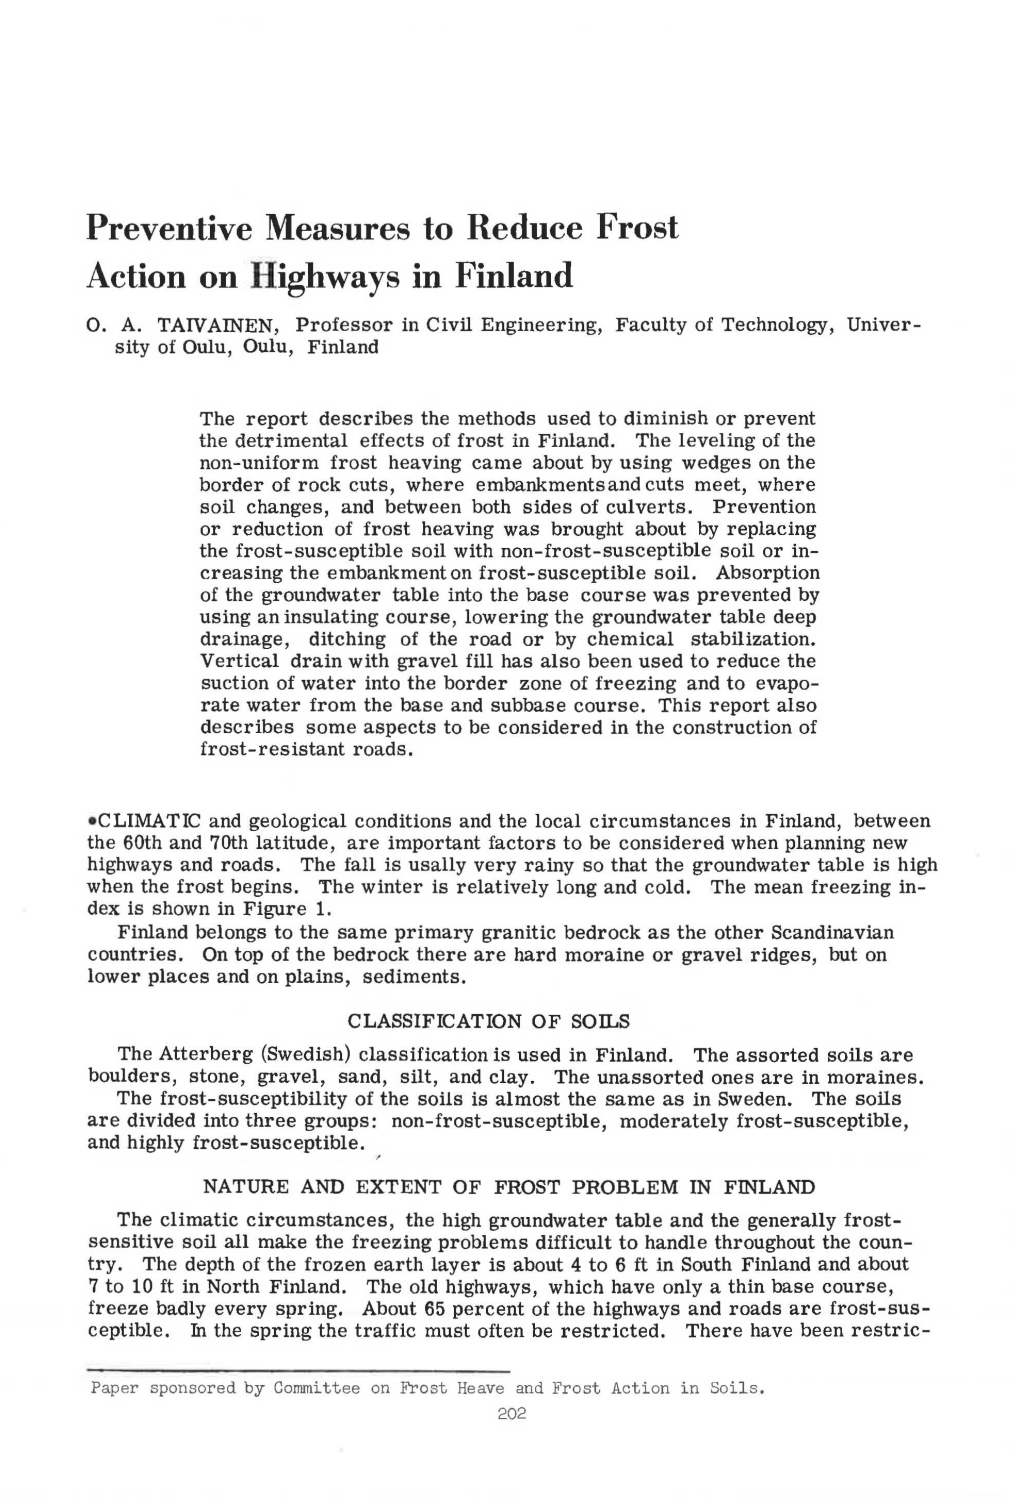 Preventive Measures to Reduce Frost Action on Highways in Finland 0